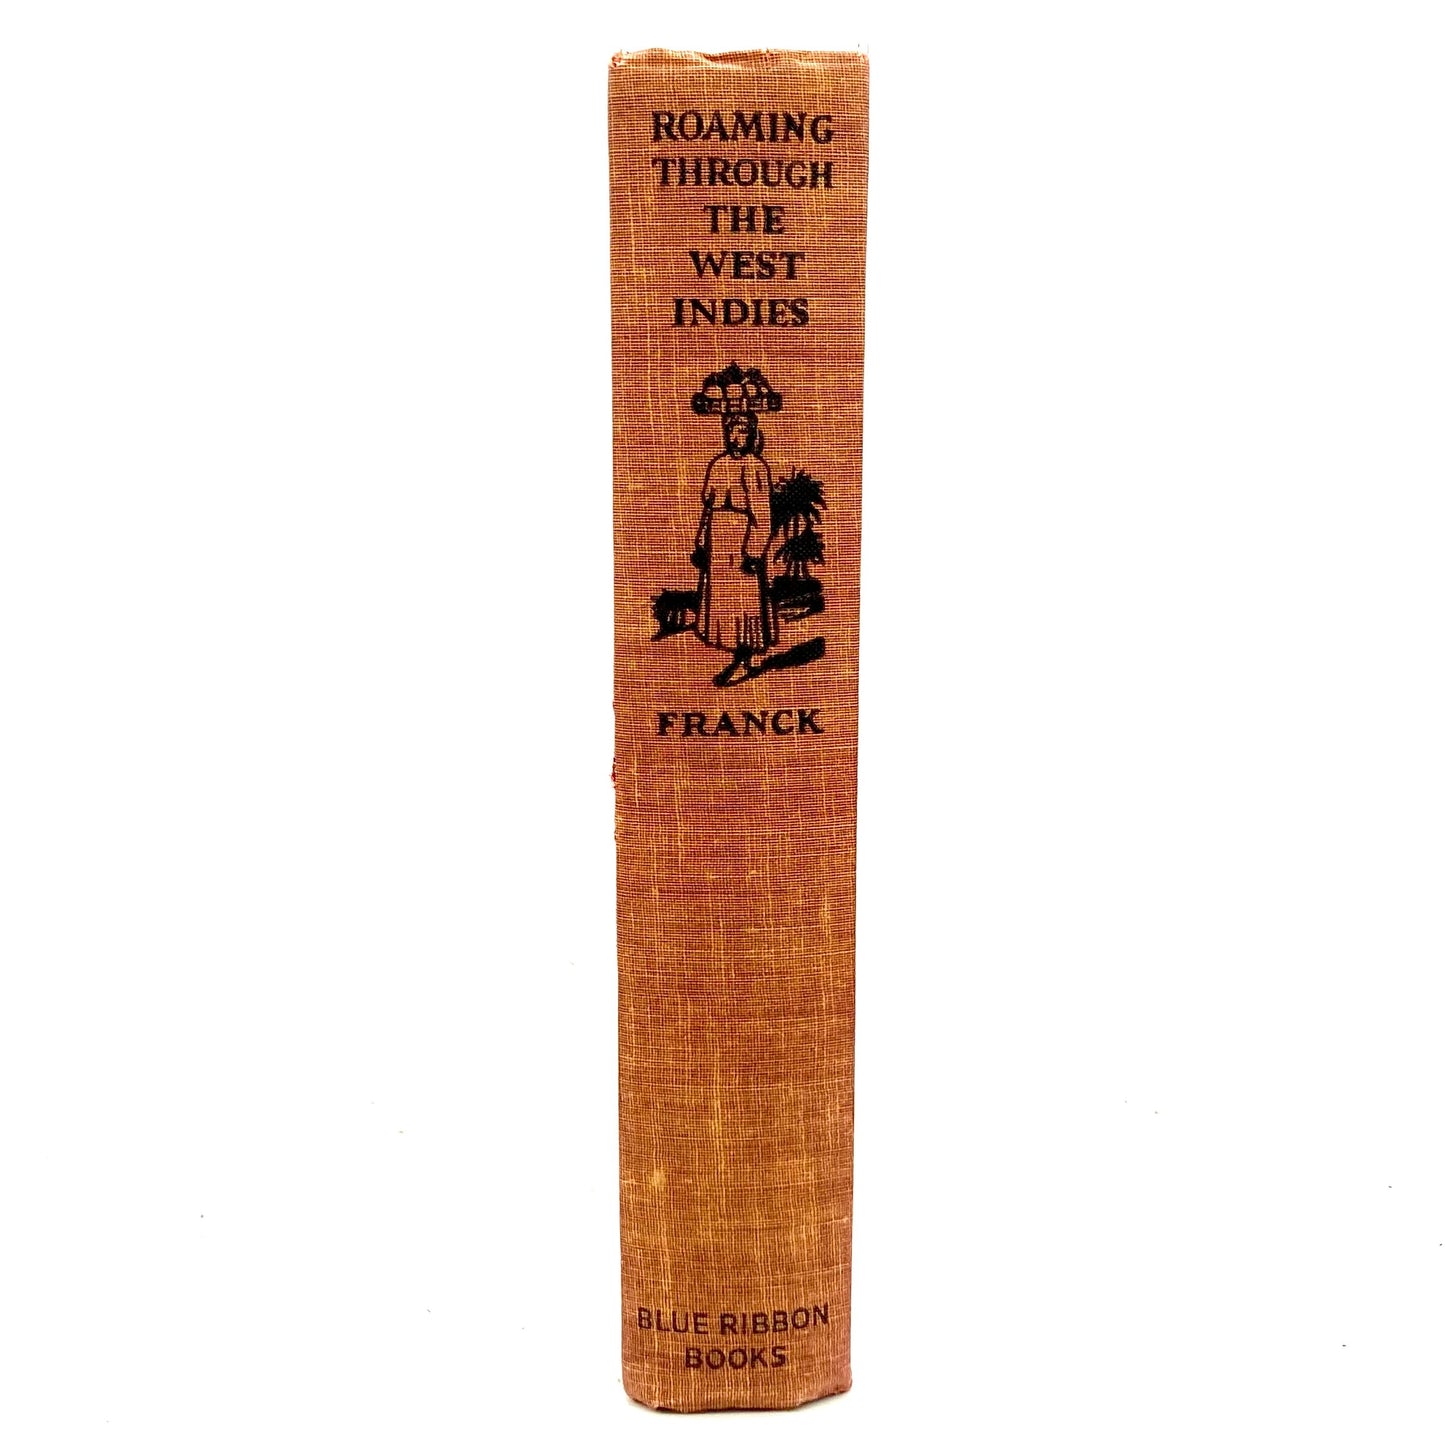 FRANCK, Harry A. "Roaming Through the West Indies" [Blue Ribbon Books, 1920] - Buzz Bookstore